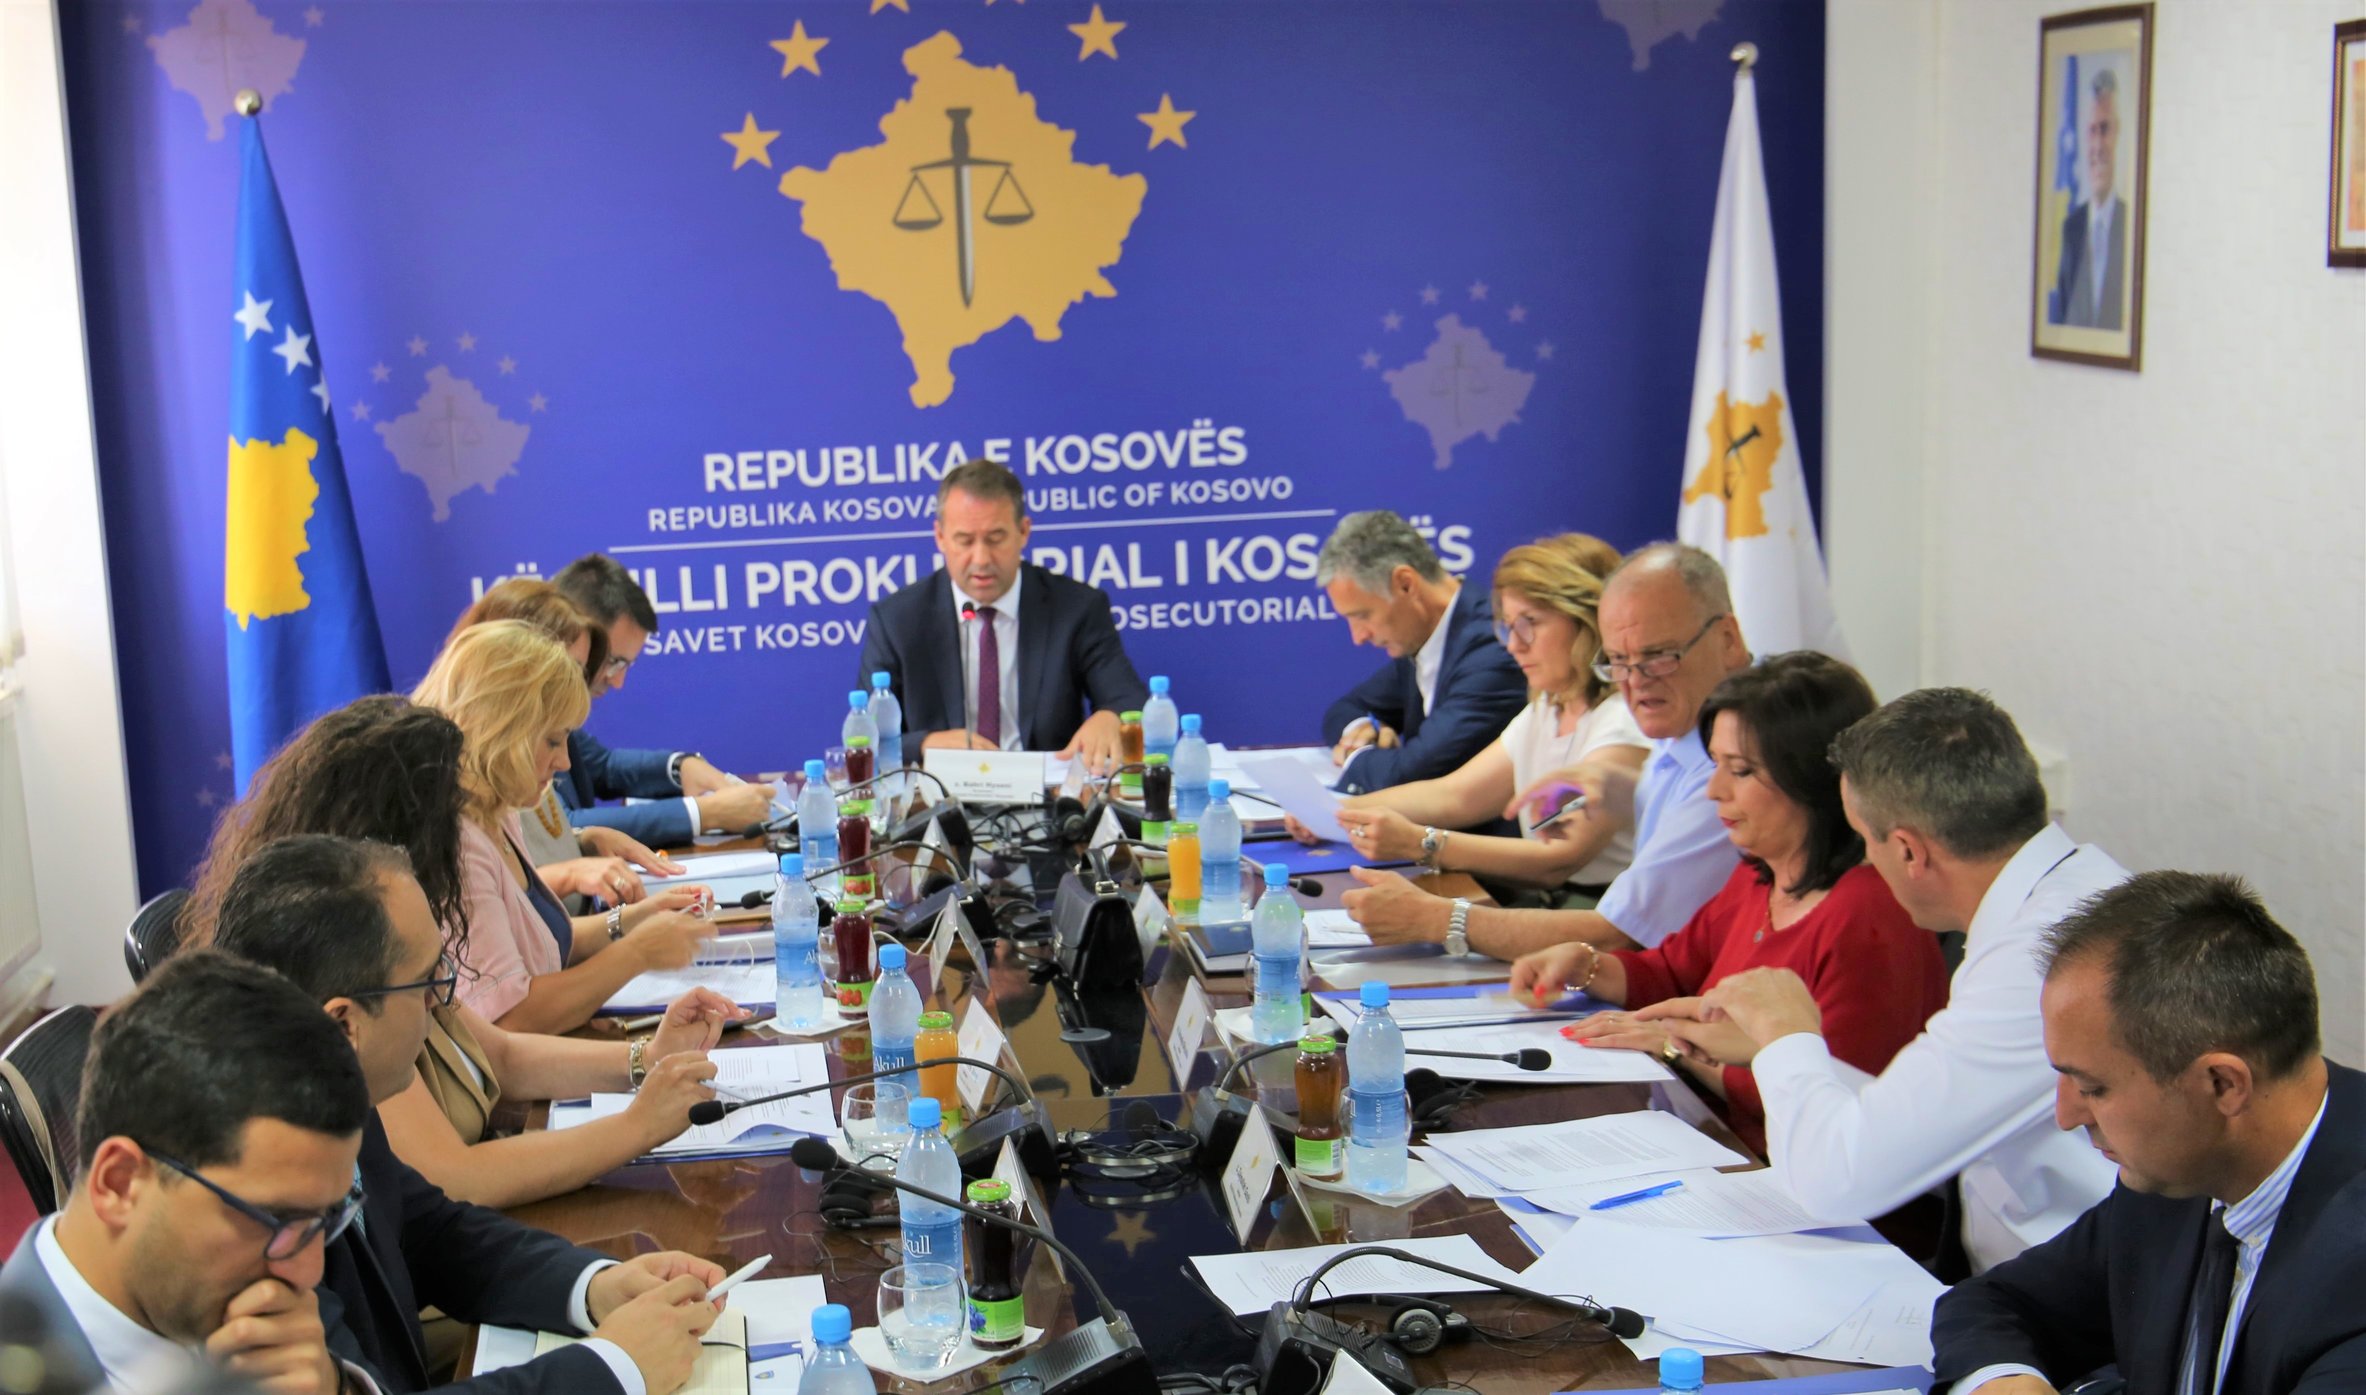 The 169th meeting of the Kosovo Prosecutorial Council is held